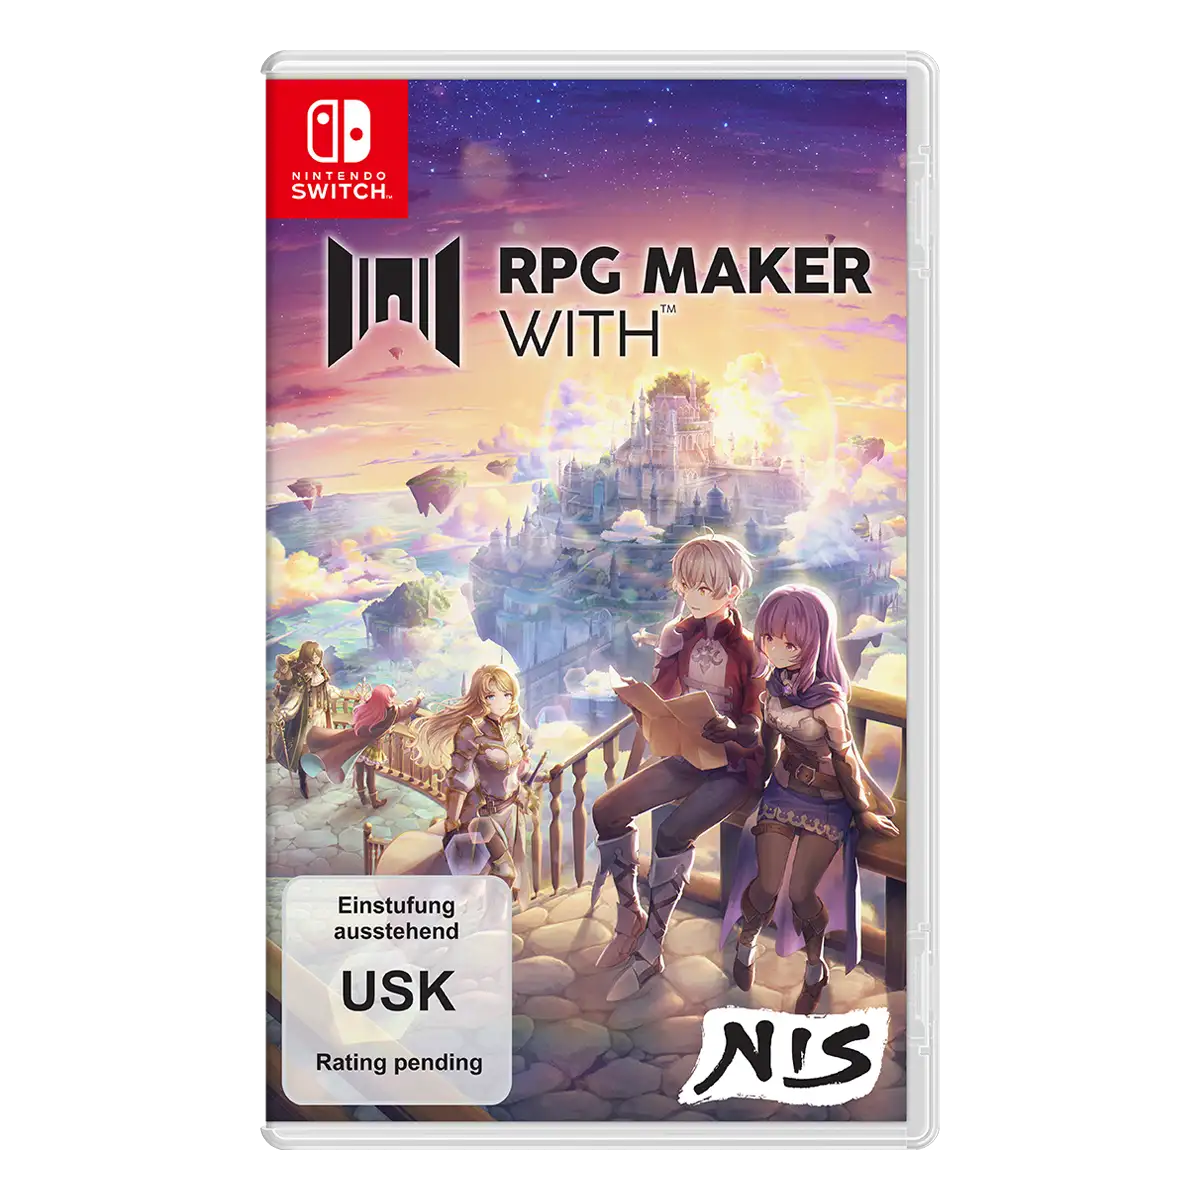 RPG MAKER WITH (Switch)